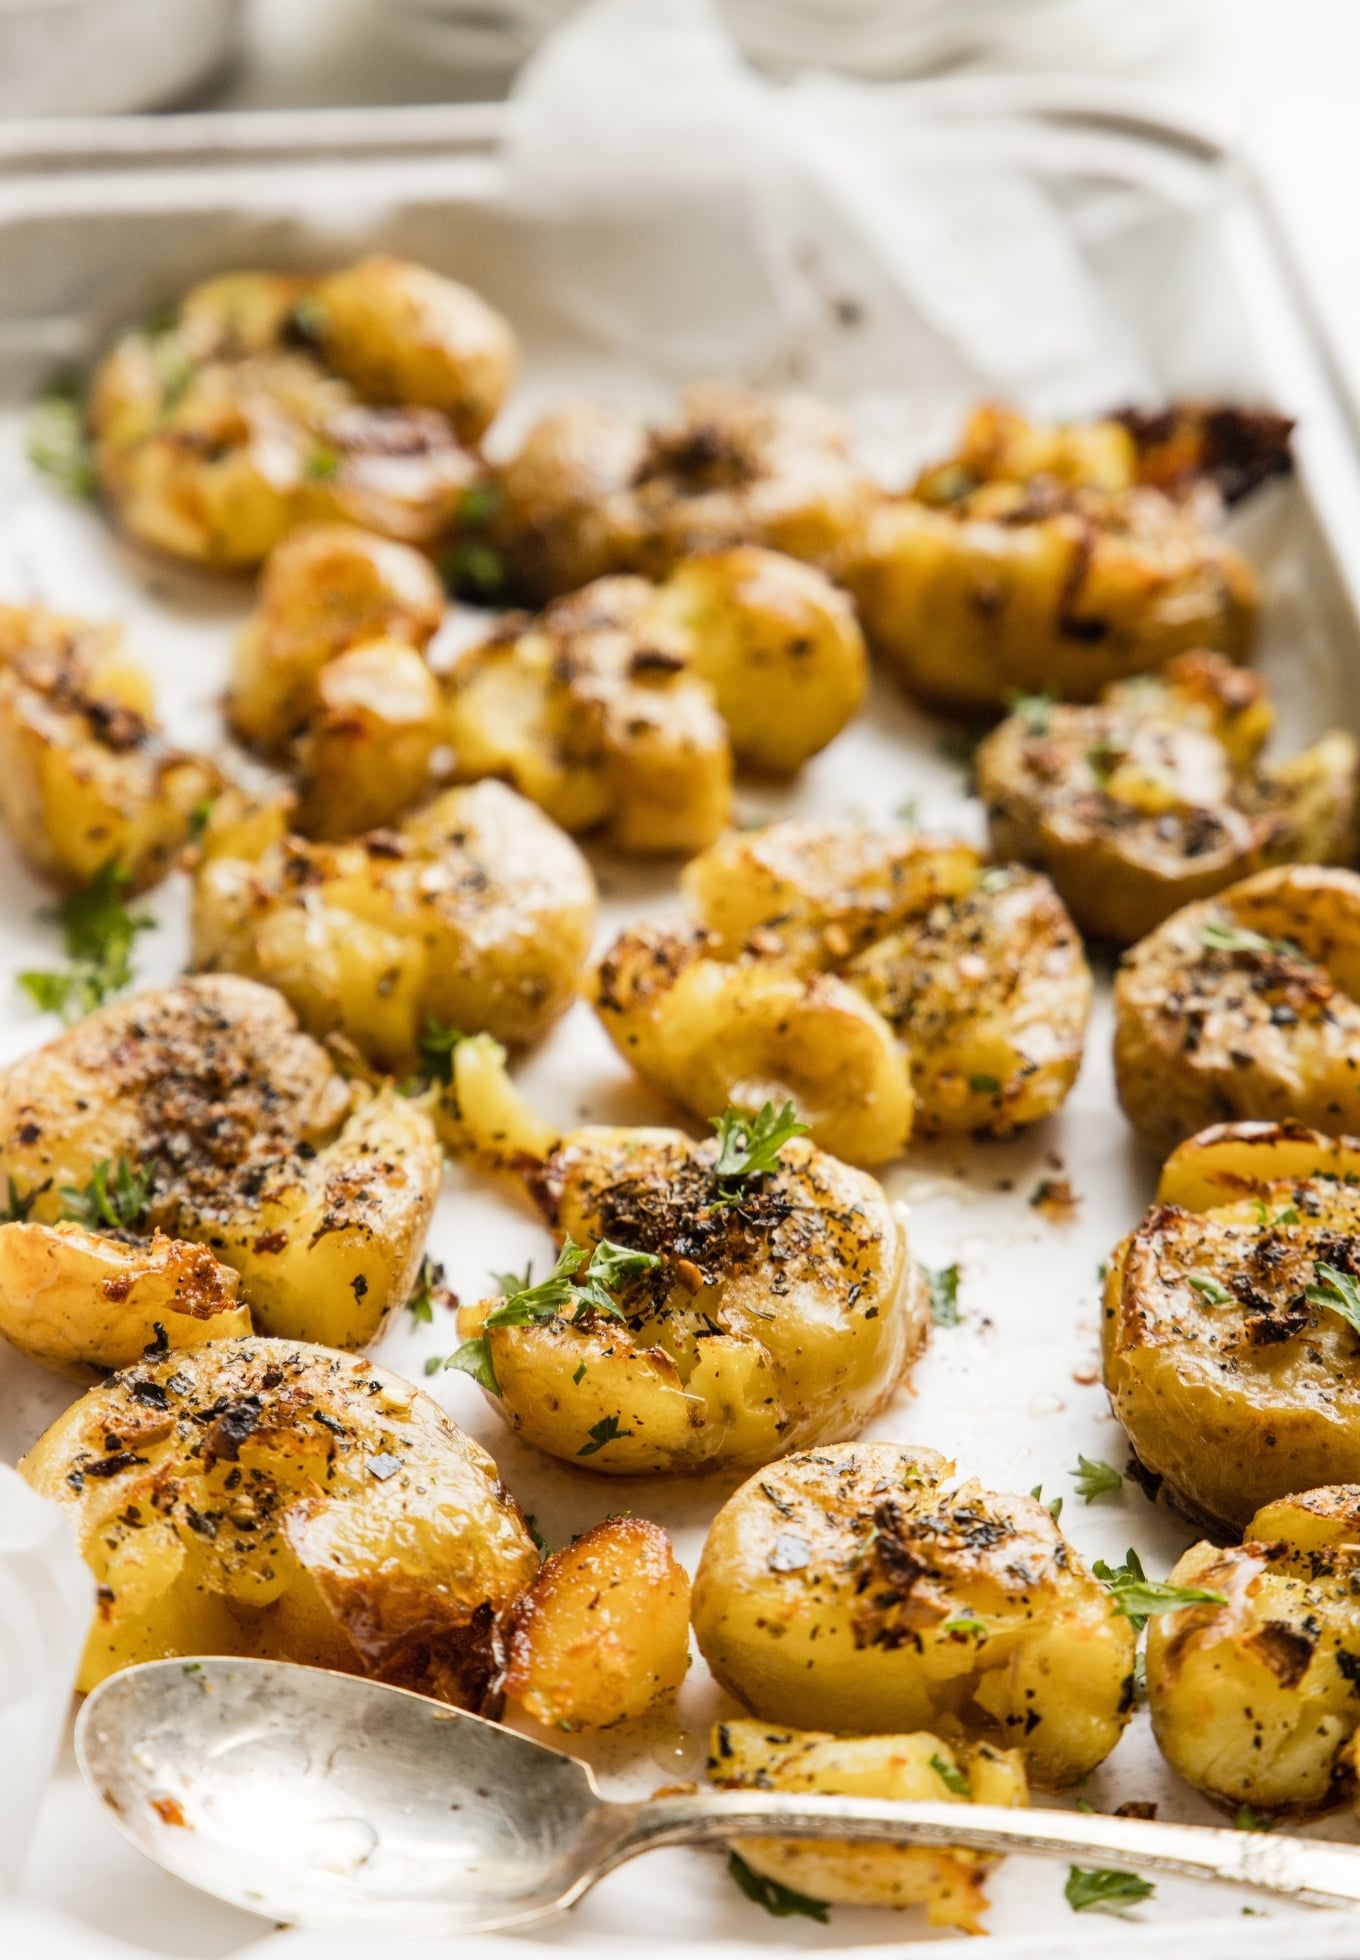 Roasted Baby Potatoes with Rosemary and Garlic - Posh Journal